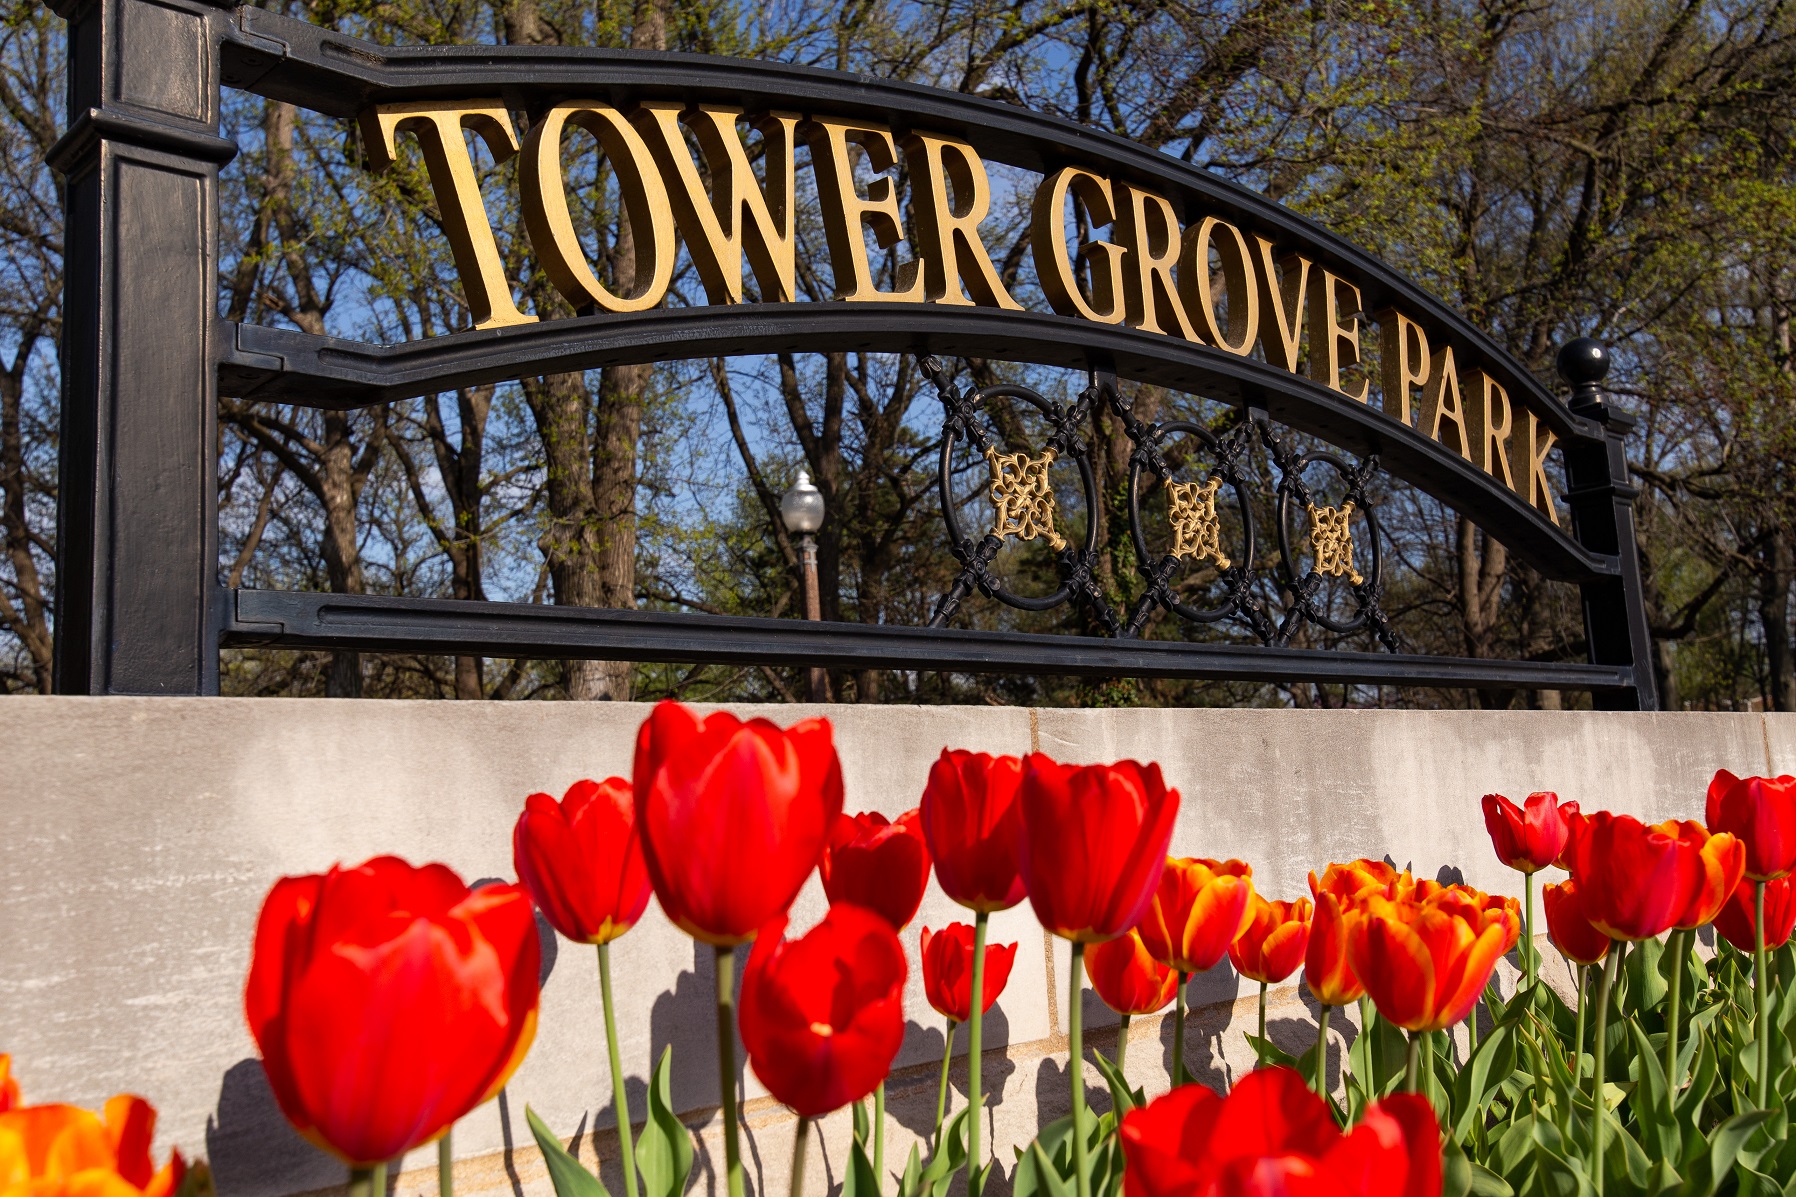 Tower Grove Park Turns 150 Years Old GAZELLE MAGAZINE